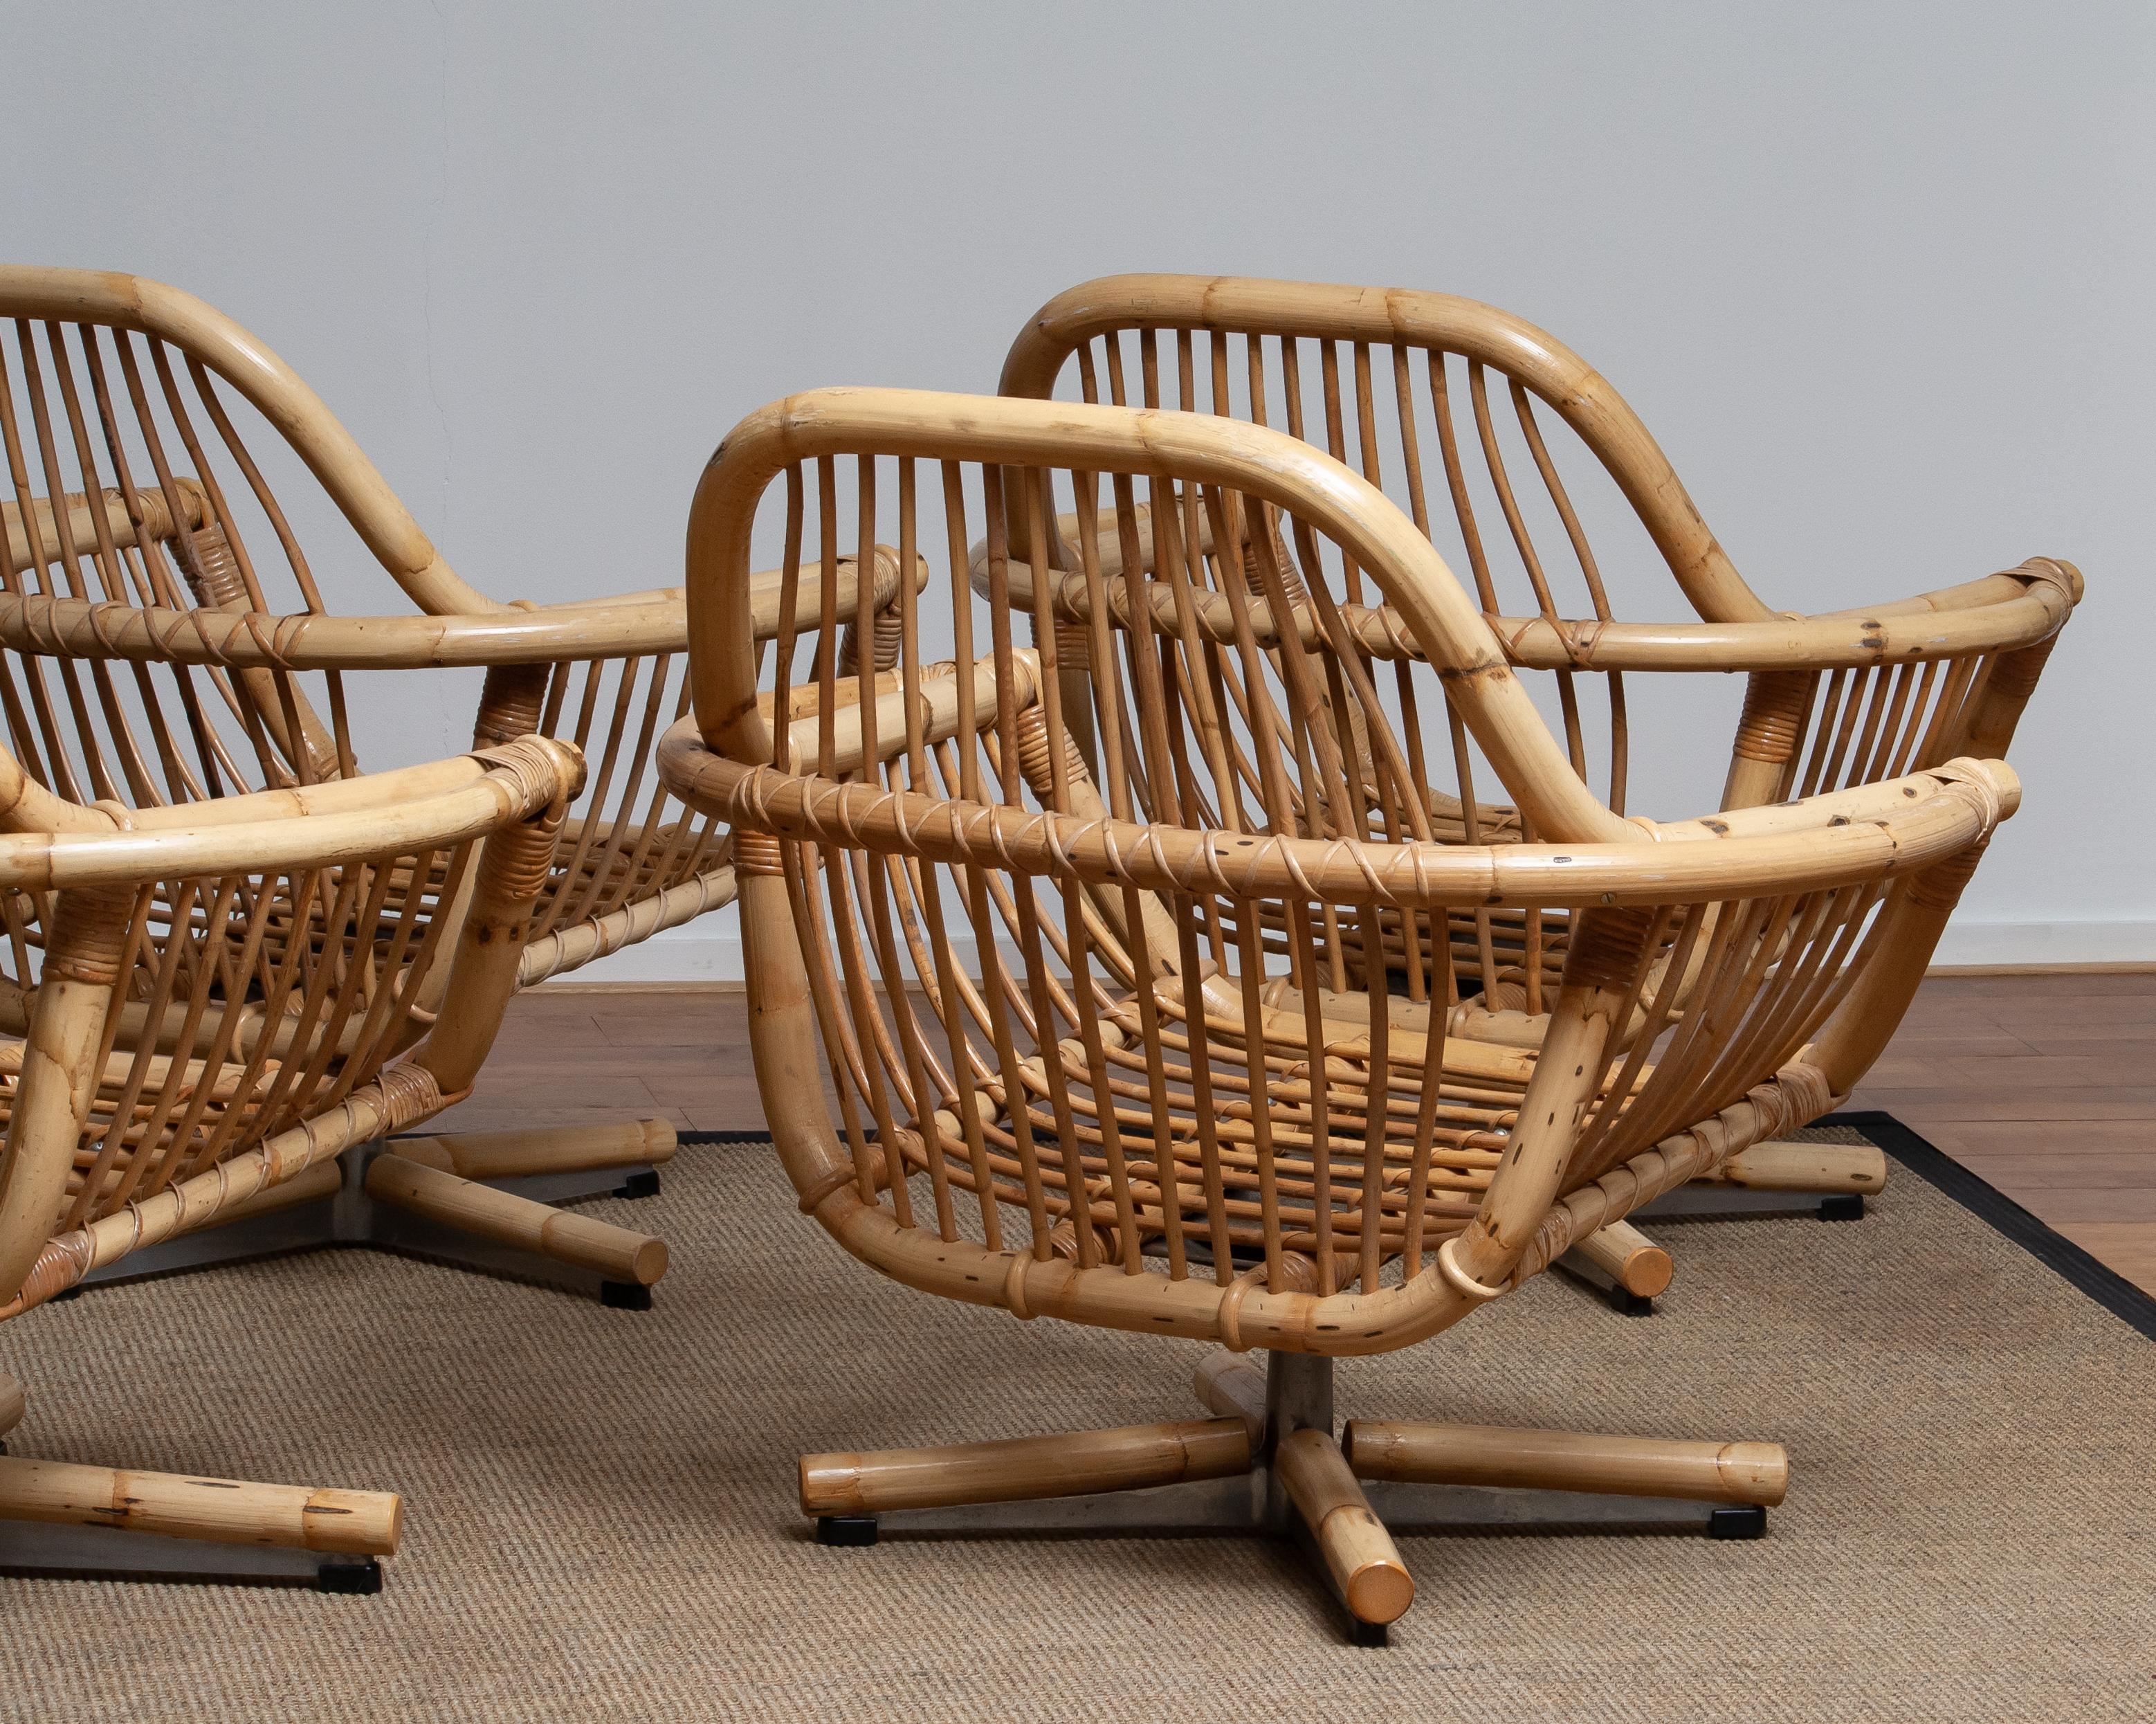 1960s Rattan Garden Set / Lounge Set Consist Five Swivel Chairs and Coffee Table 4